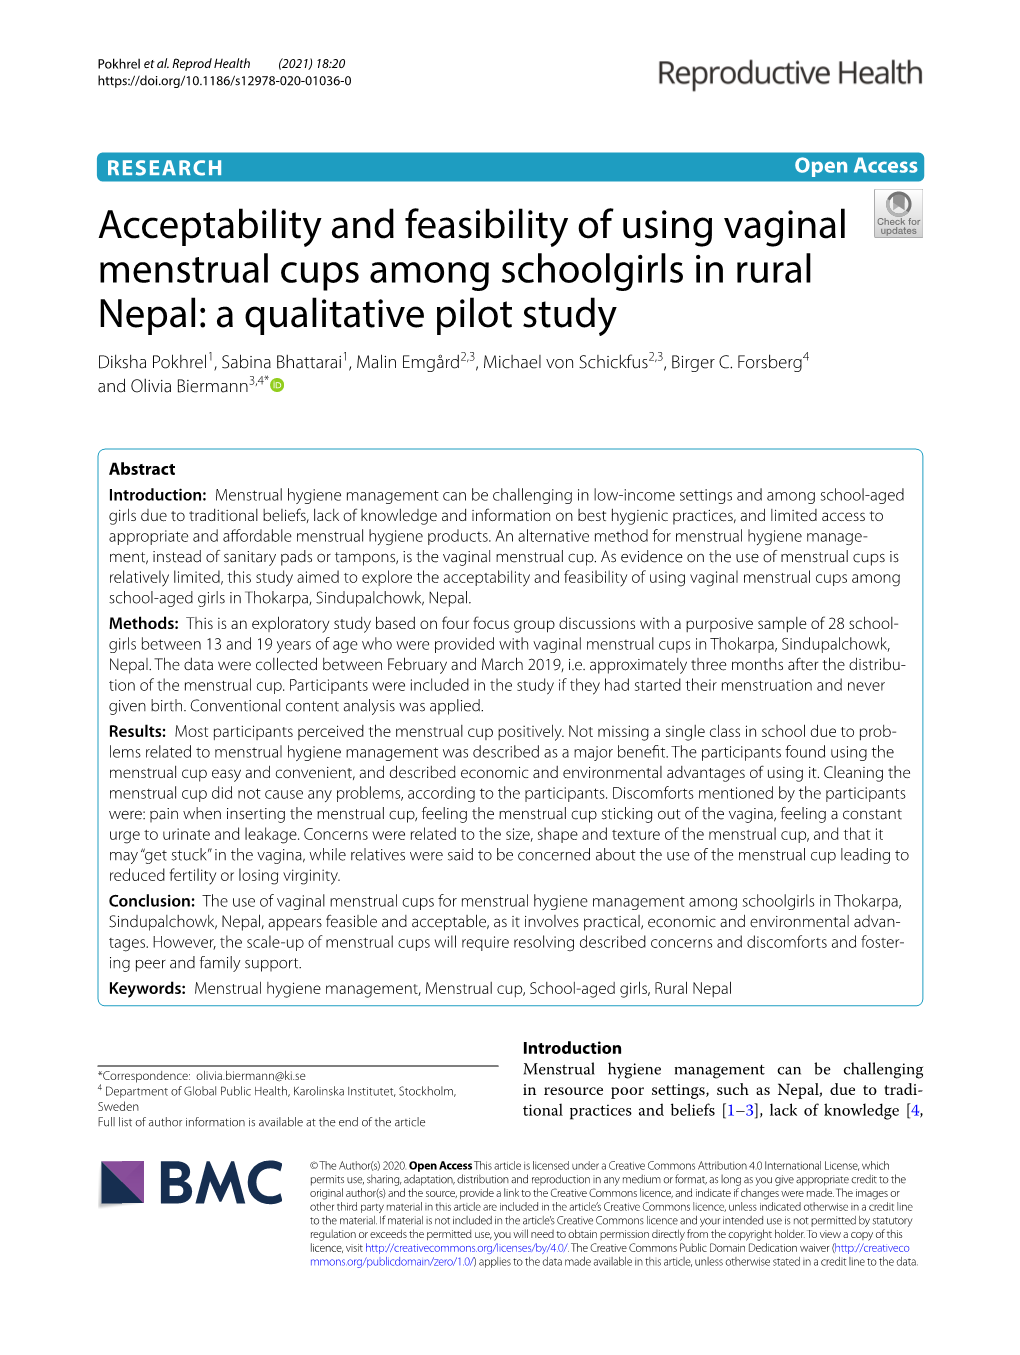 Acceptability and Feasibility of Using Vaginal Menstrual Cups Among